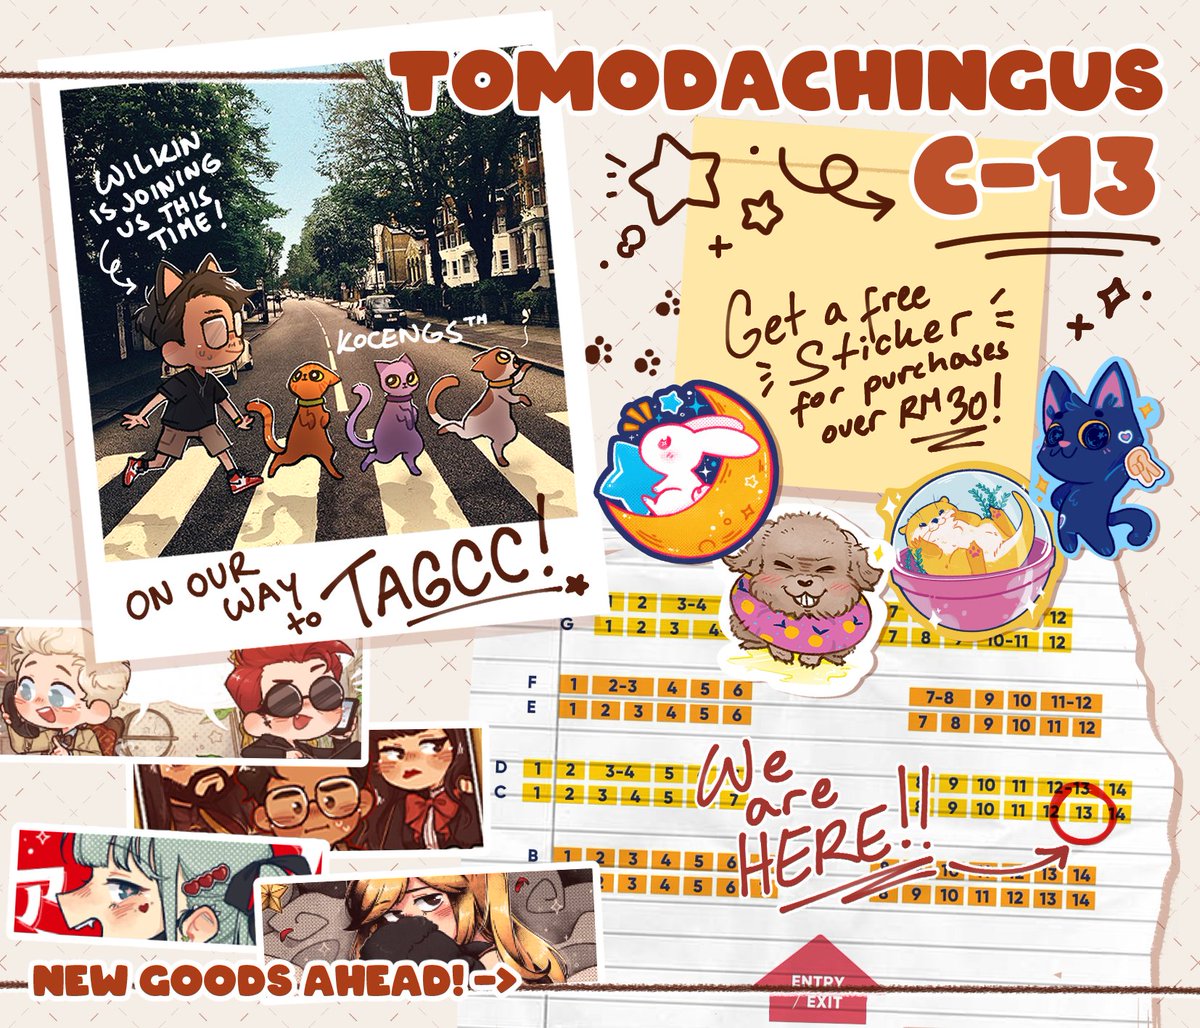 herro everynyan ✨️
here's my catalog for #tagcc2023 !!!

this time @wilkinleeart is joining me, @a_liottr, and @pistchachios at C-13 Tomodachingus ✨️

got a new merchs but sadly couldn't get the spiderverse stuffs restocked rn 🥹 cosmic hopefully!

sEE YALL THERE !!!!💖💖💖 